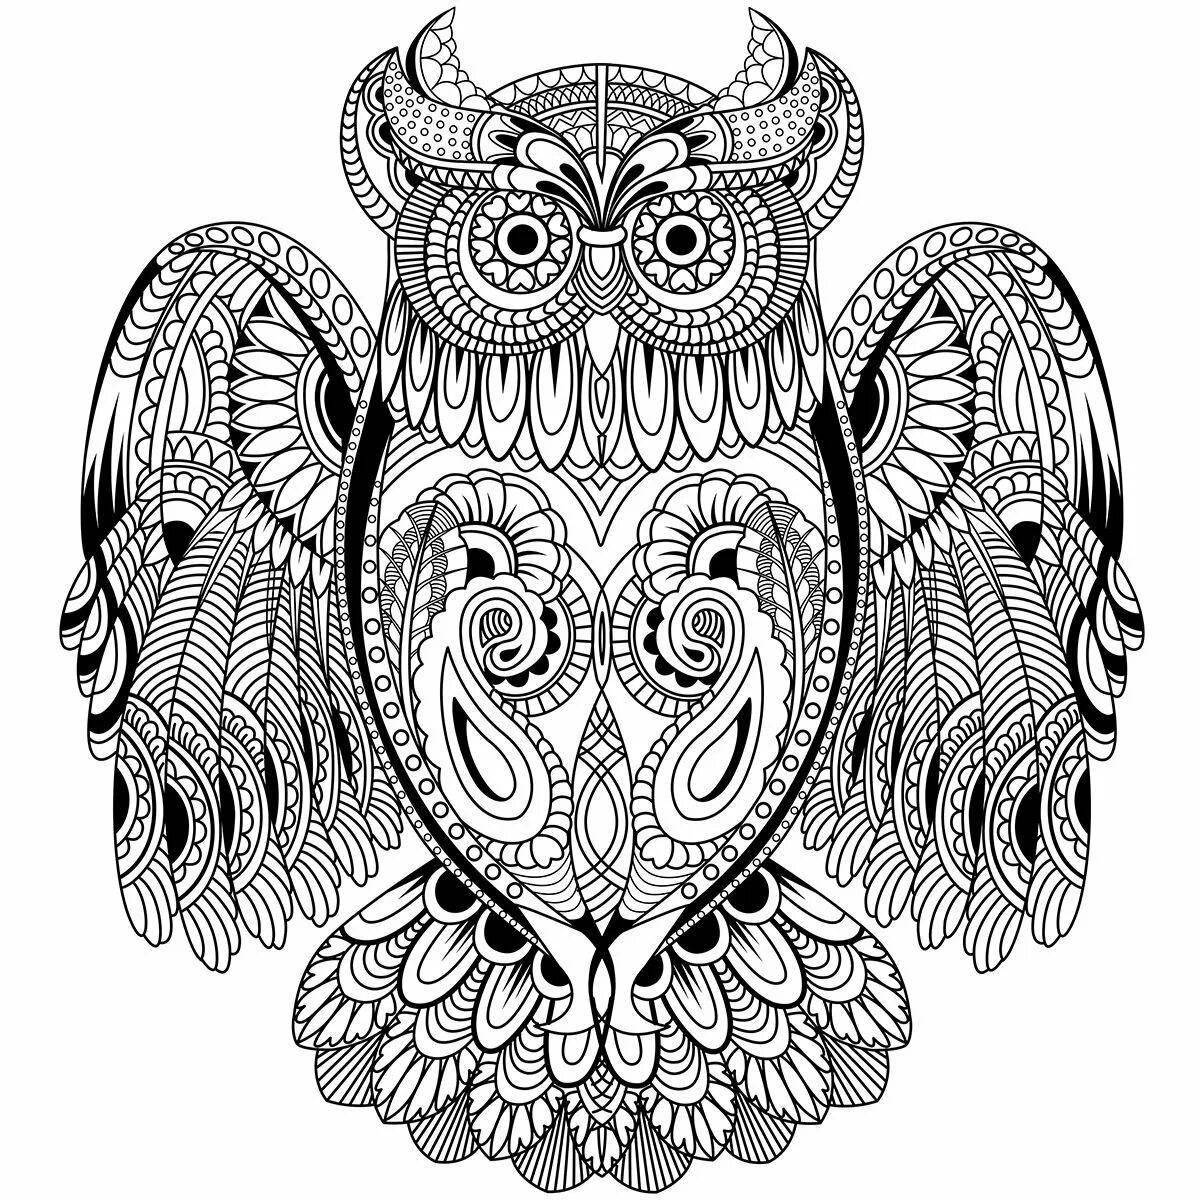 Splendorous coloring page black and white complex